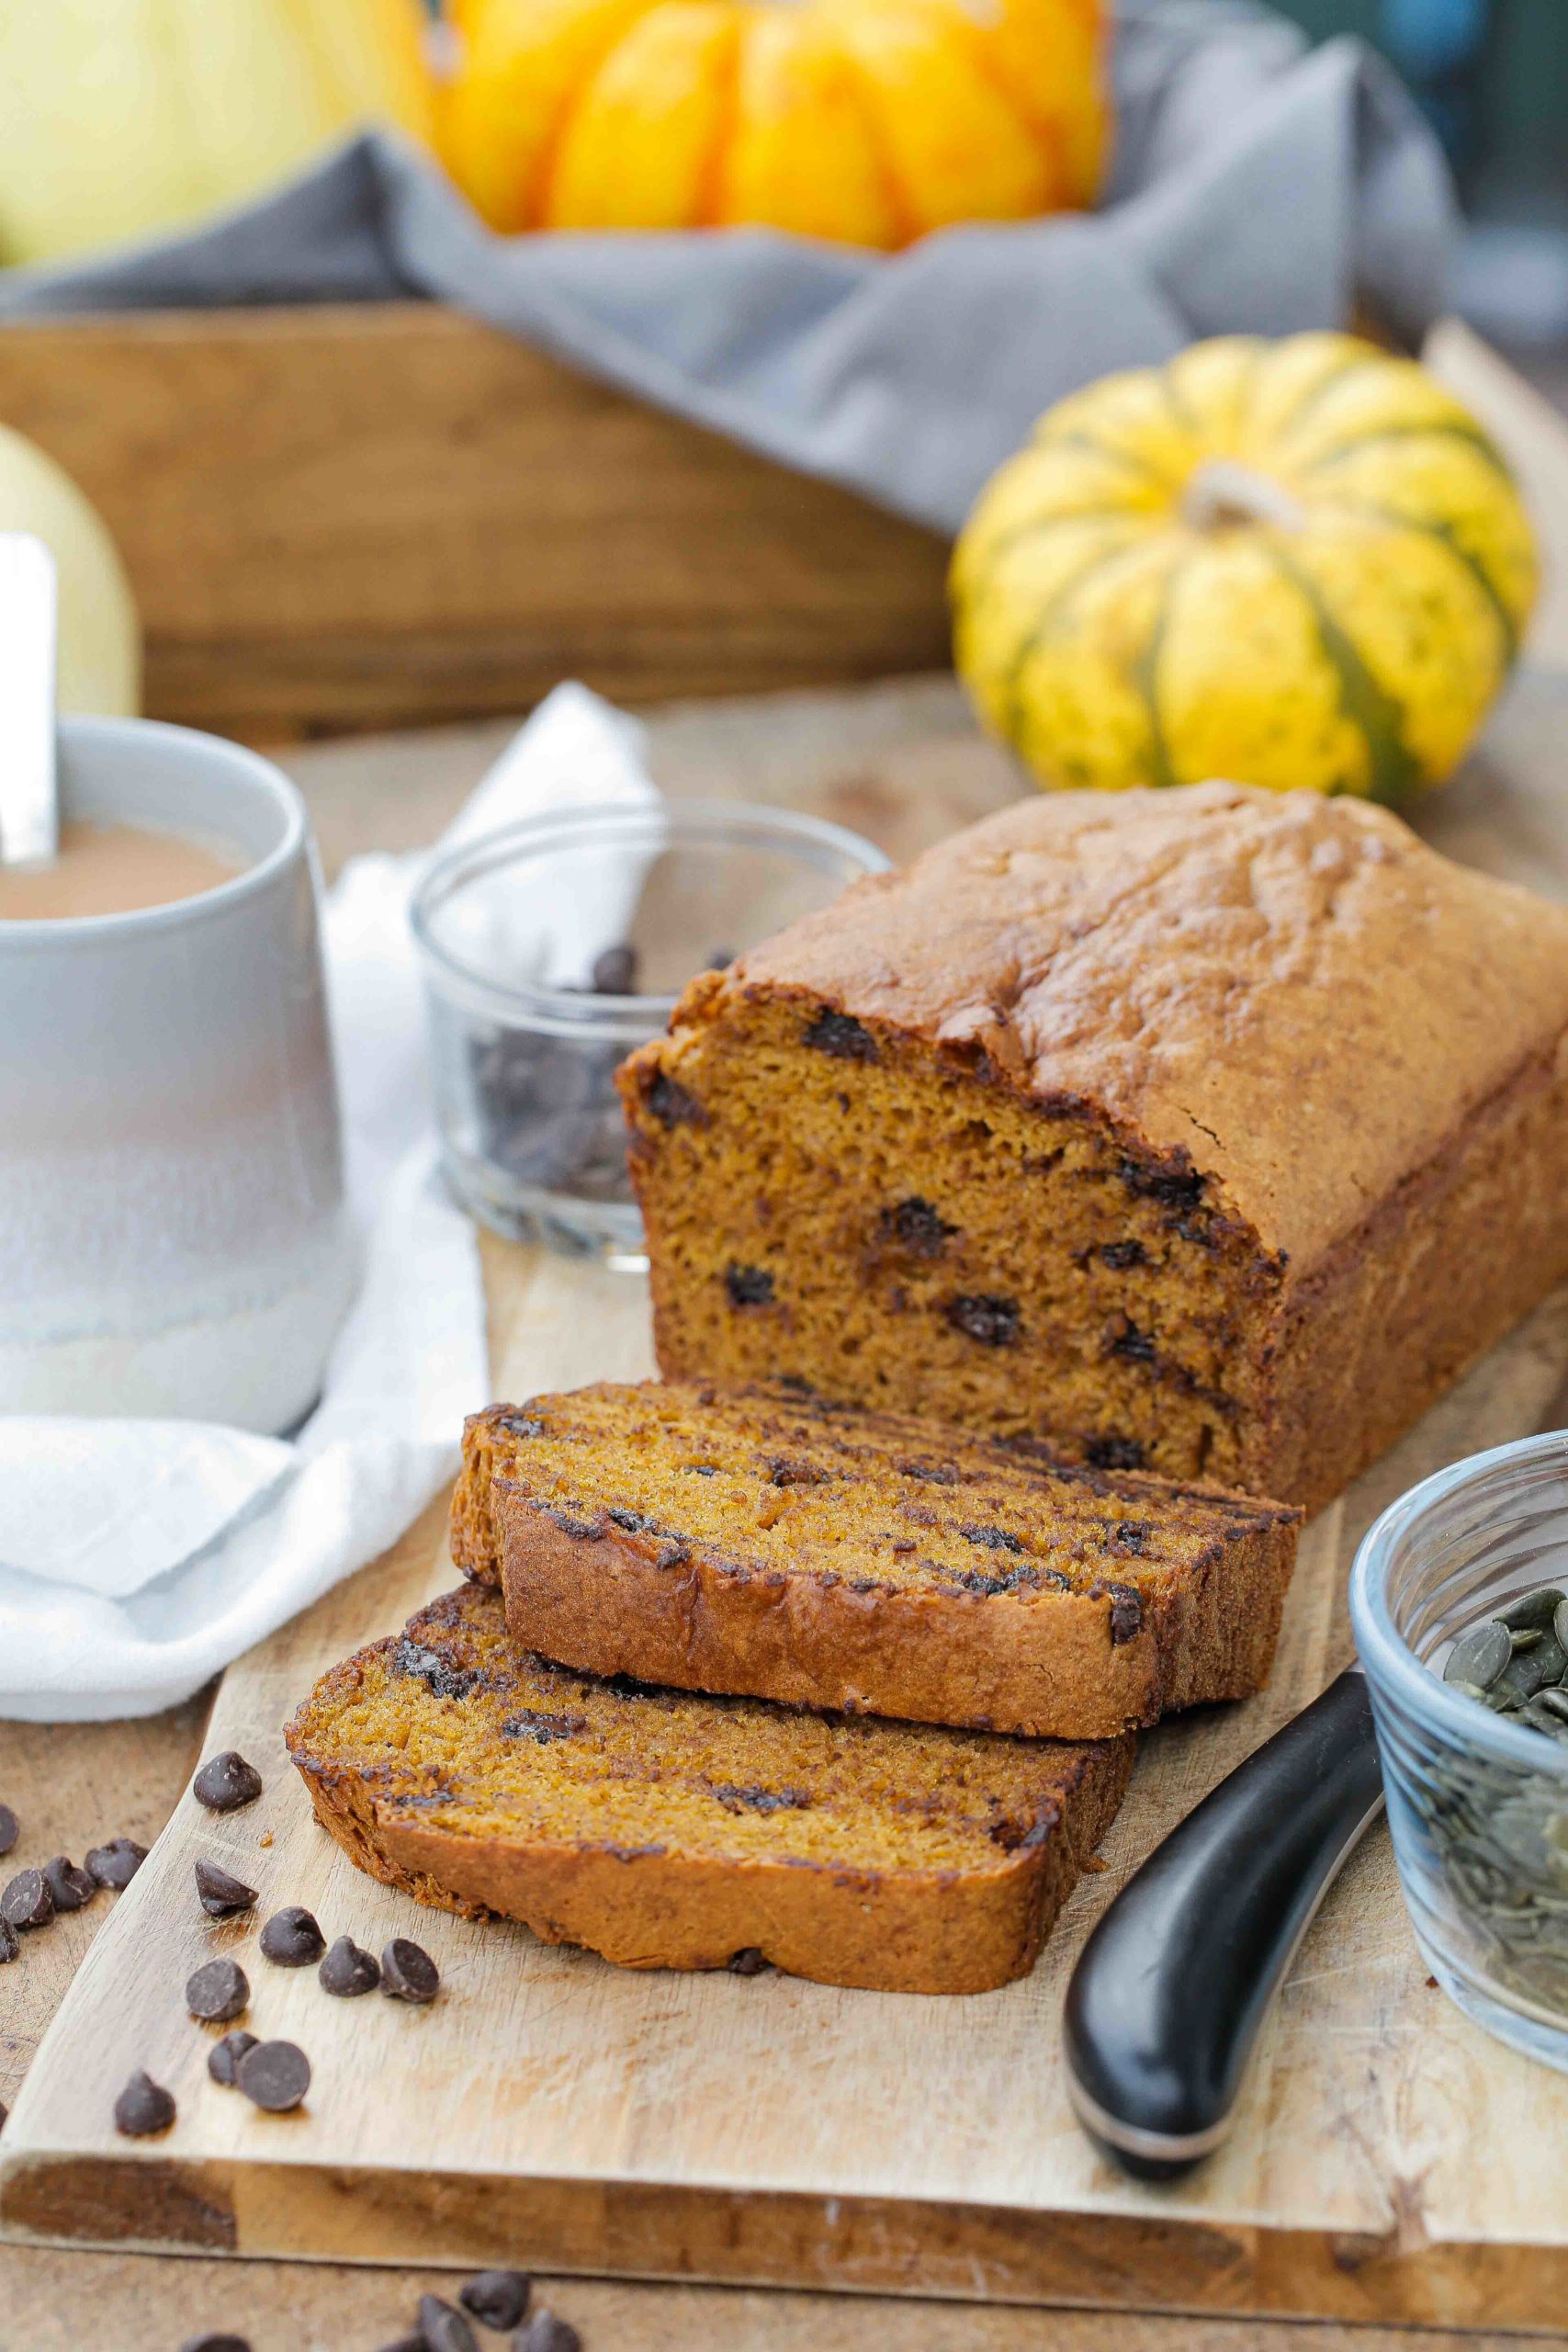 Embrace cosy autumn days with this lightly spiced, fluffy and divinely squidgy vegan pumpkin chocolate chip bread. A lovely autumn treat! Recipe on thecookandhim.com #pumpkinbread #pumpkincake #pumpkinpureerecipe #pumpkinrecipes #autumnrecipes #vegancakerecipe